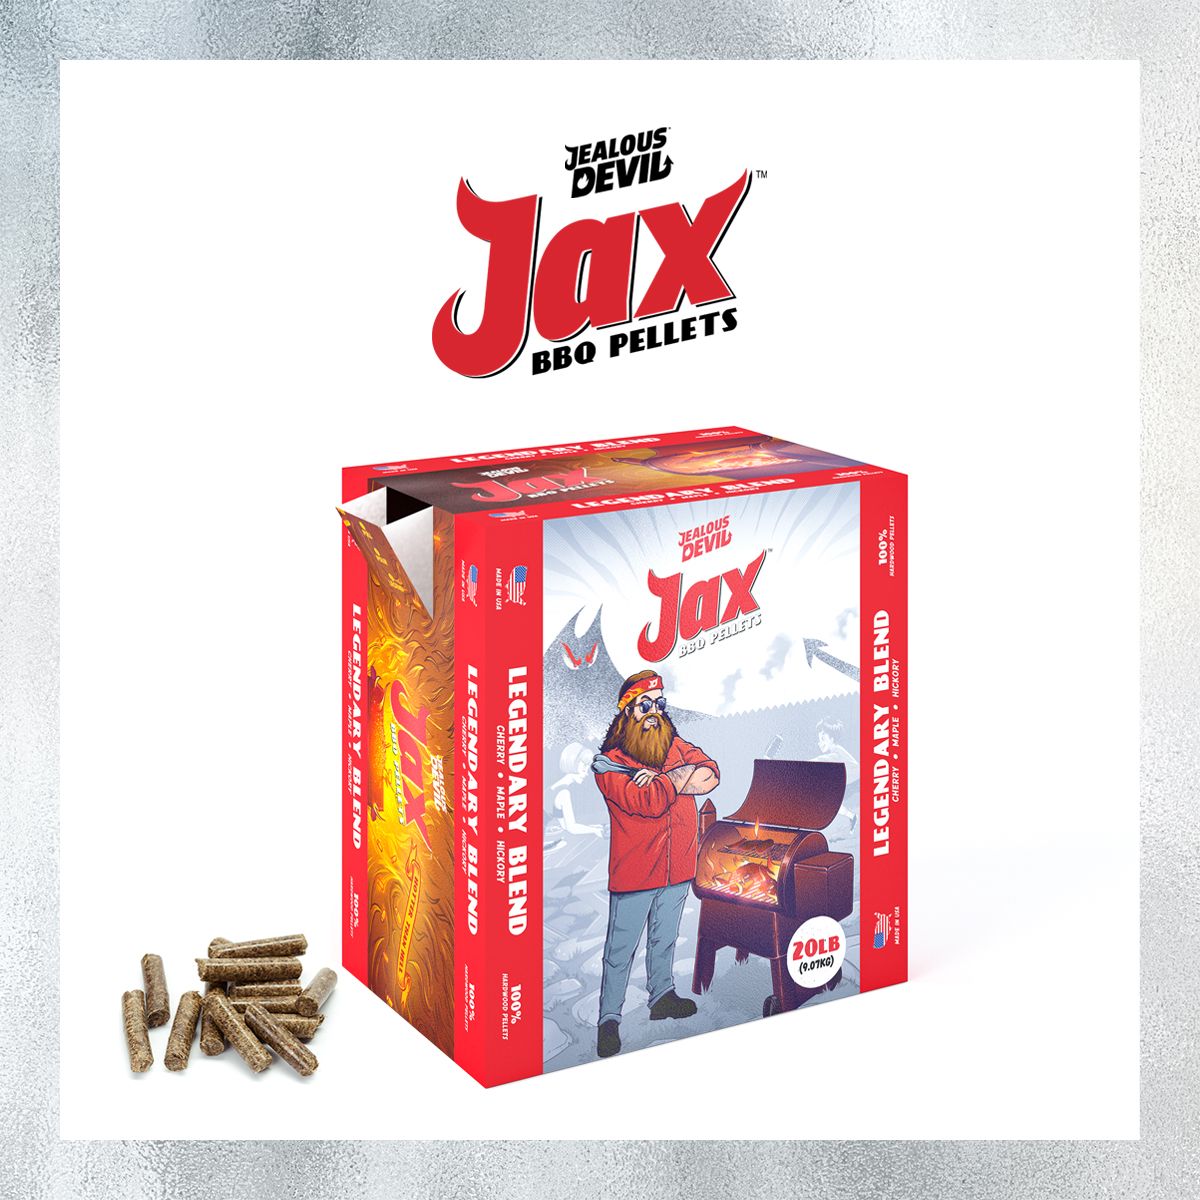 So, there's been some rumors going around … about Jax. Jealous Devil's Legendary Blend of BBQ Pellets is hitting the shelves at the end of October. Are you ready to Legend? #JealousDevil #Legendary #LegendMaker #PureAsHeavenHotterThanHell #Jax #JaxBBQPellets #BBQPellets